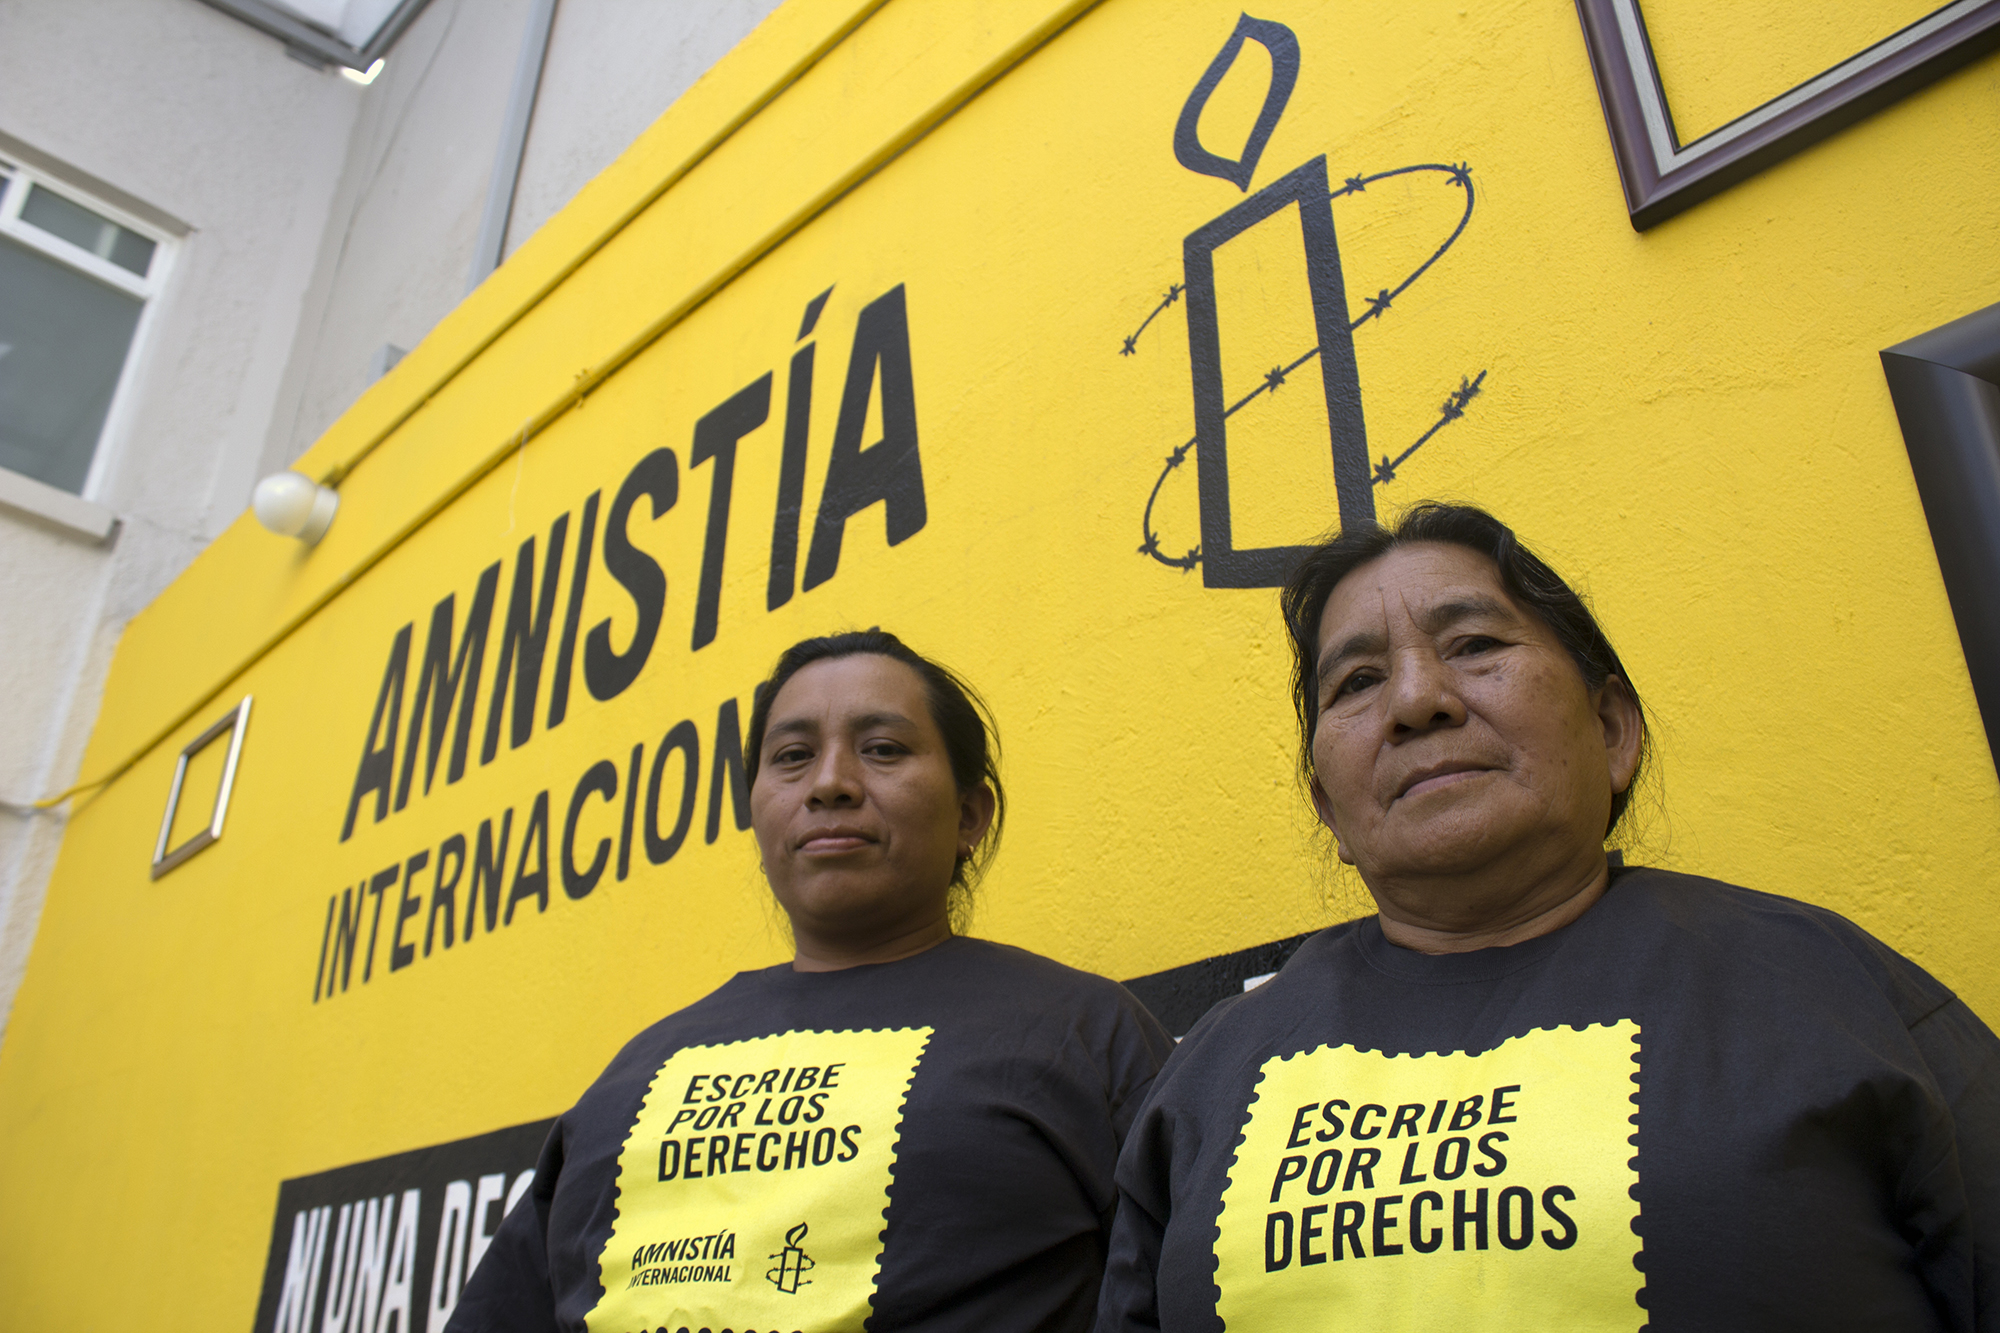 Cecilia Vásquez Sánchez and María Elena Sánchez, Teodora Vásquez Sánchez's sister and mother, pose at Amnesty International's office in Mexico City. Both are wearing Amnesty International tee shirts. In 2008, Teodora del Carmen Vásquez was sentenced to 30 years in prison for “aggravated homicide” after suffering a still-birth at work. Teodora, mother of an 11-year-old boy, was expecting a new baby when she started experiencing increasingly severe pain. She called the emergency services but her waters broke soon afterwards. She went into labour, and was unconscious when she gave birth. When she came round, bleeding profusely, her baby was dead. Police at the scene handcuffed her and arrested her on suspicion of murder. Only then did they take her to hospital where she could get the urgent treatment she needed. In El Salvador, women who miscarry or suffer a still-birth during pregnancy are routinely suspected of having had an “abortion”. Abortion under any circumstance is a crime, even in cases of rape, incest, or where a woman’s life is at risk. This makes women afraid to seek help with pregnancy-related problems, leading inevitably to more preventable deaths.